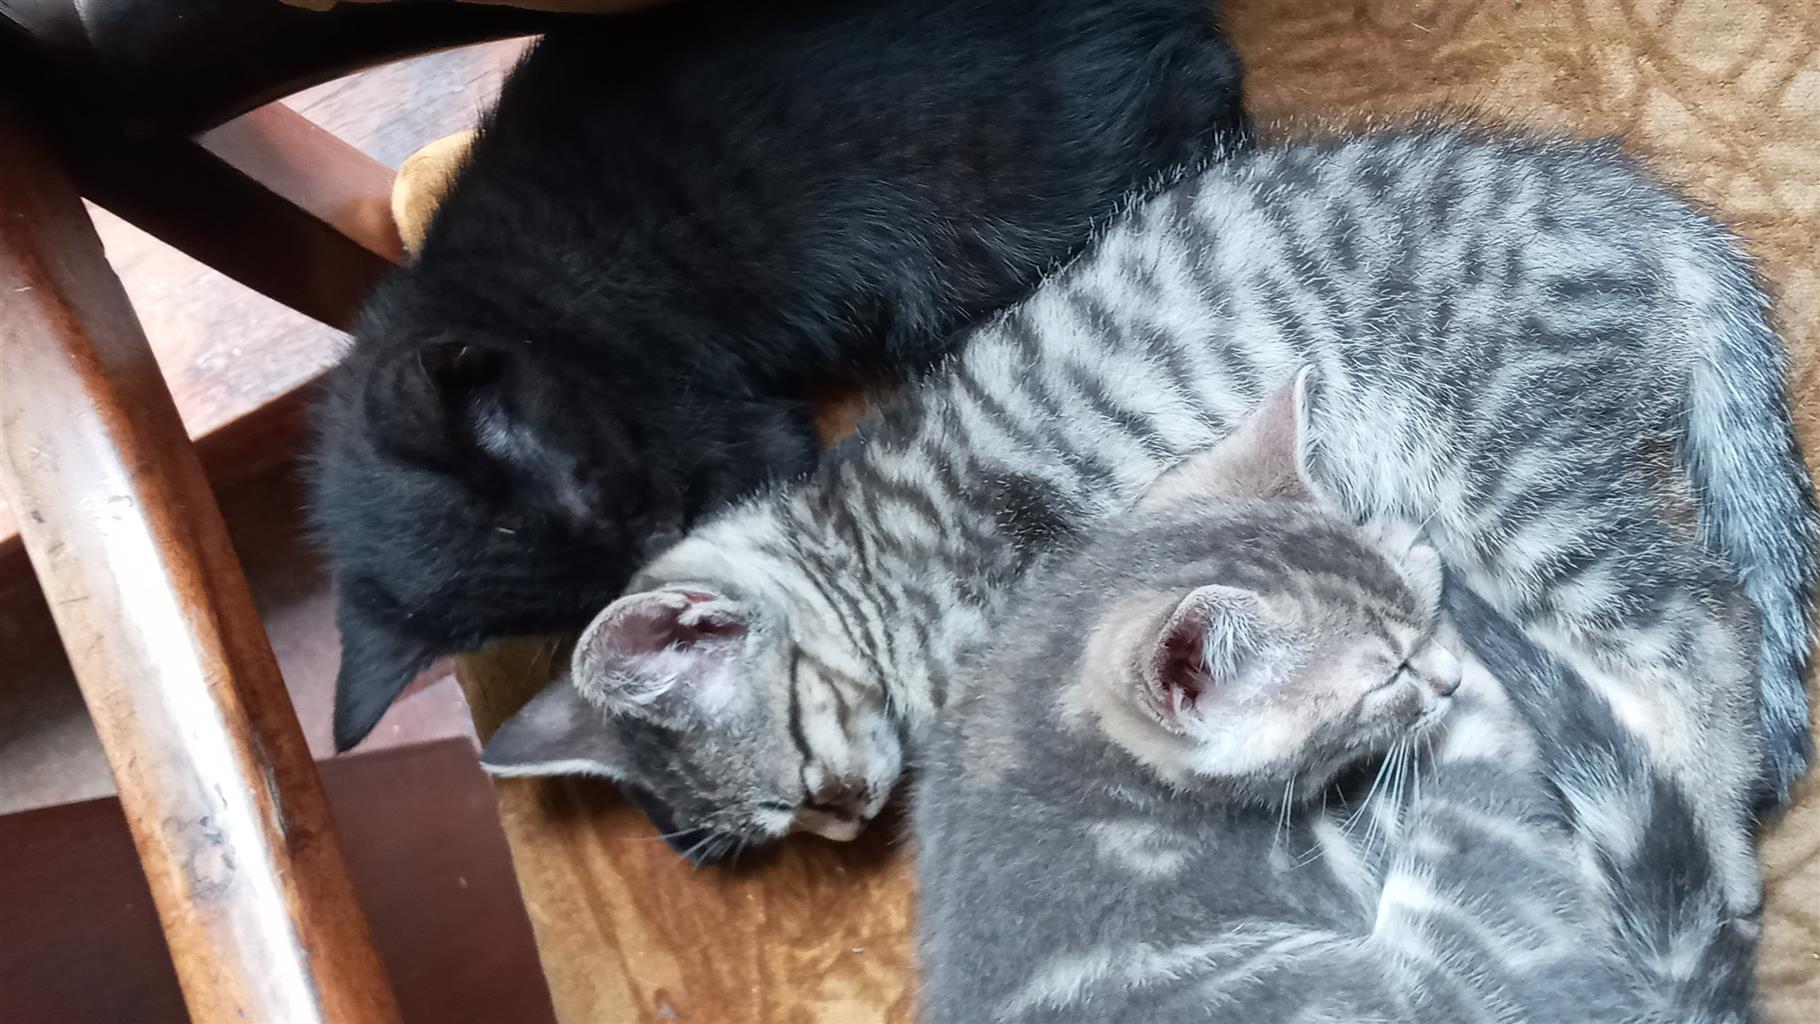 All three little kitties looking for a home